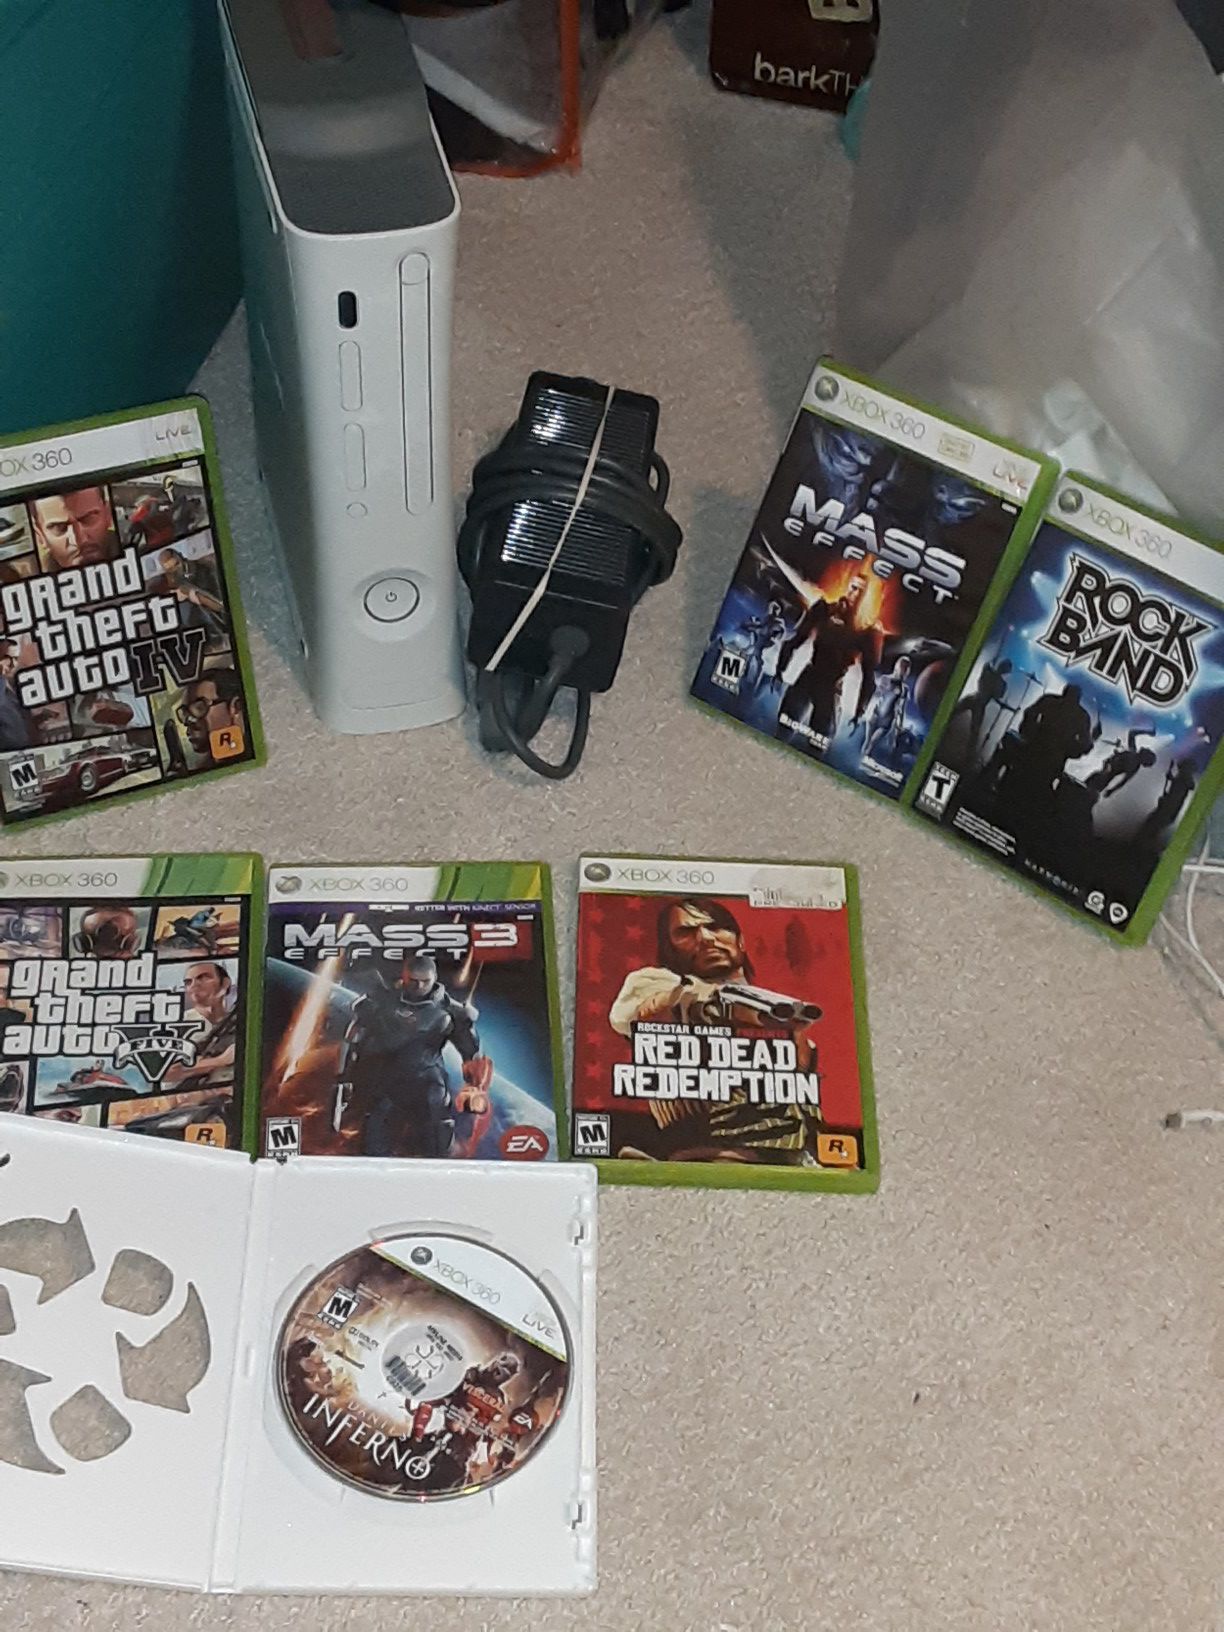 XBOX-360 Combo with 8 games Rockband Drum pedal two controllers , Dantes Inferno, Red Dead Redemption, Grand theft Auto +